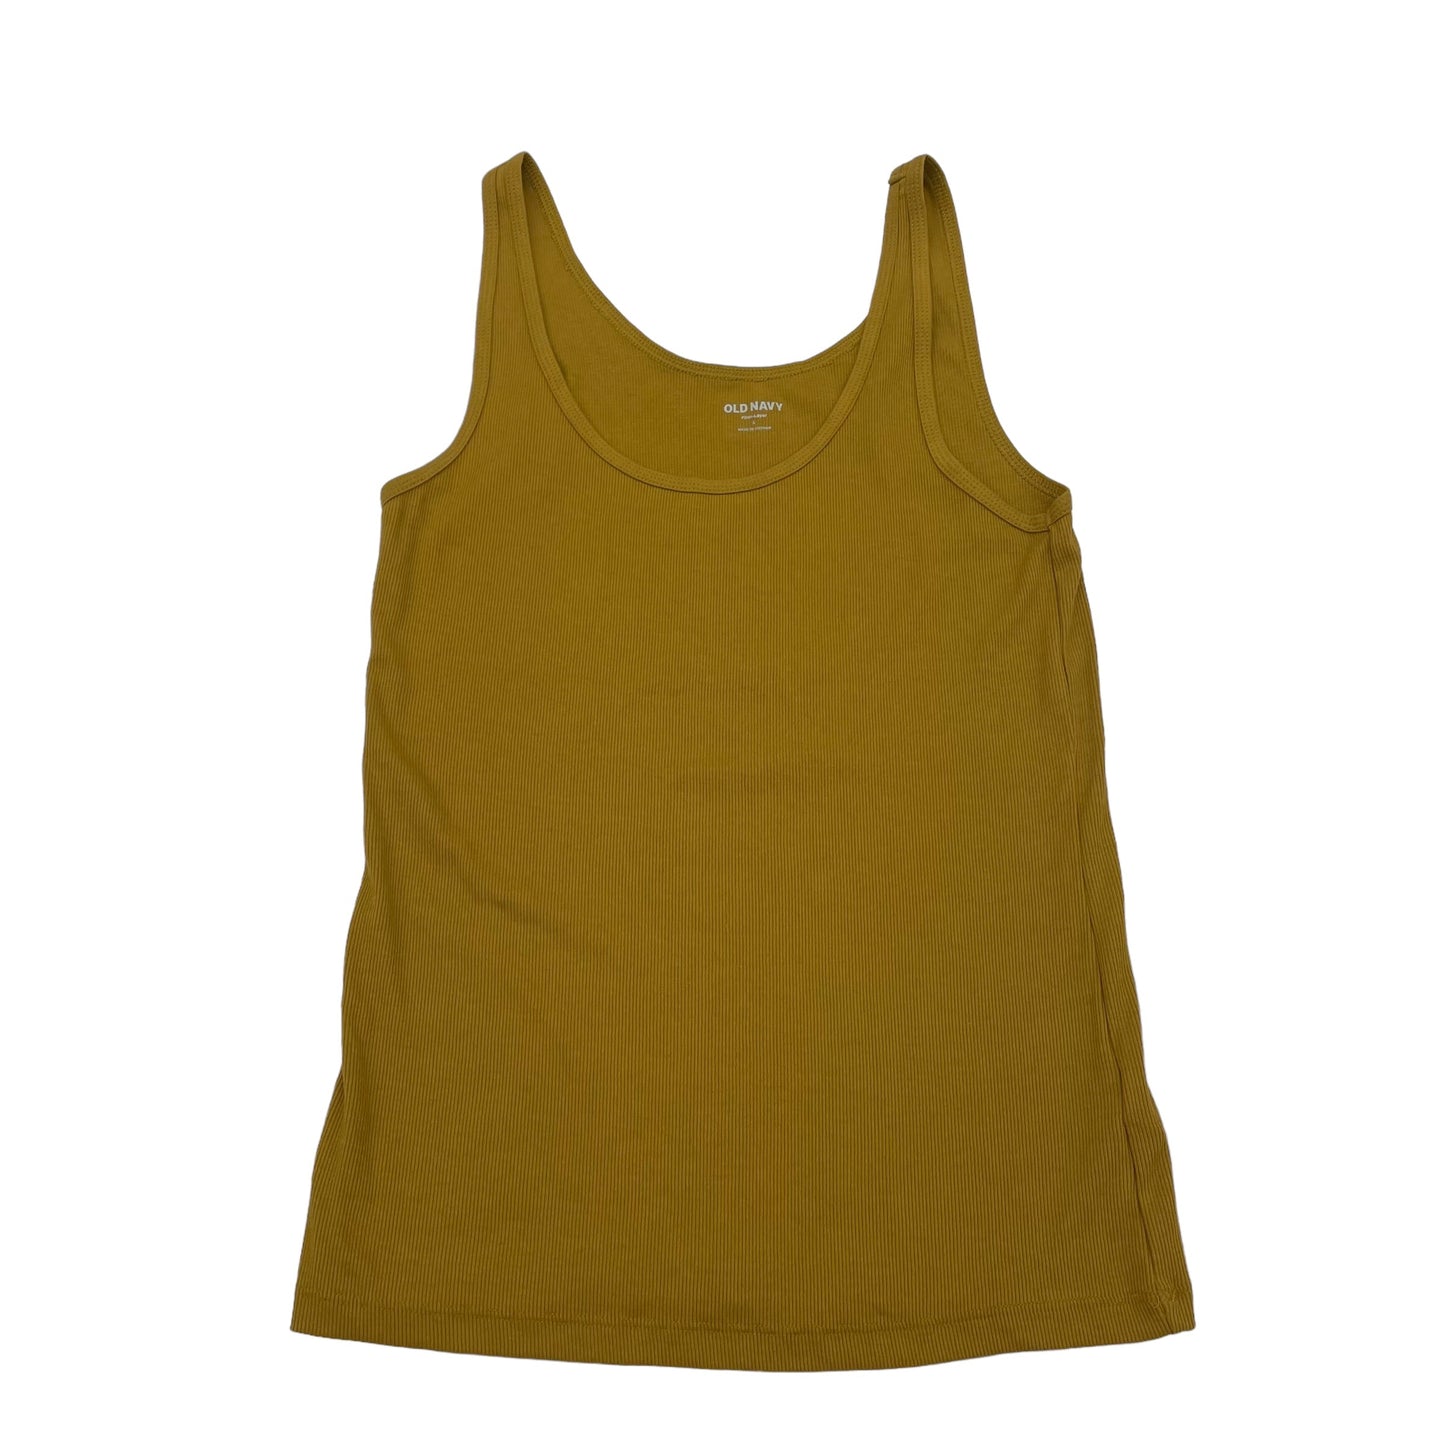 YELLOW OLD NAVY TANK TOP, Size L